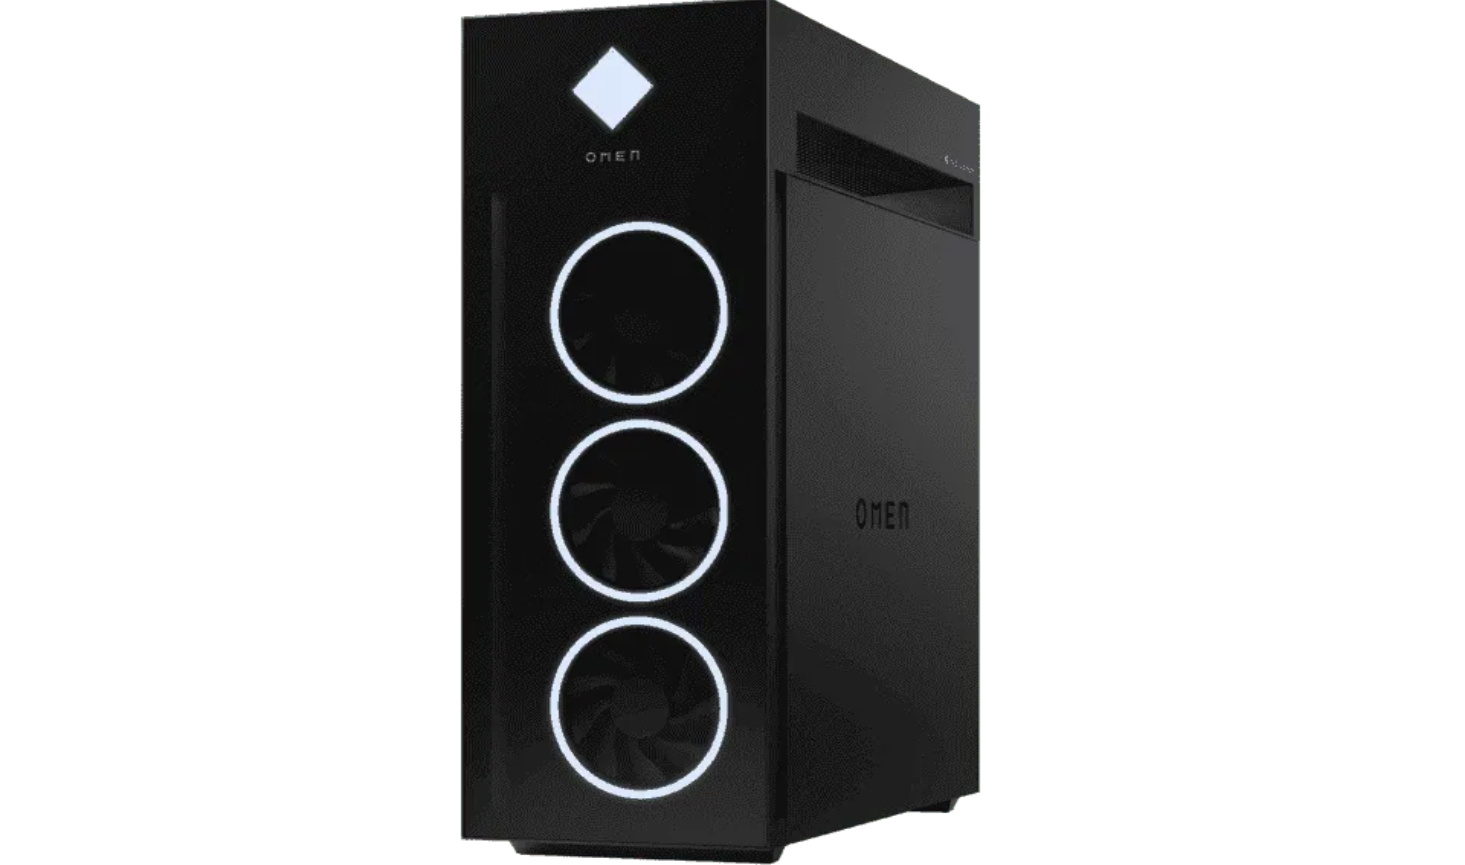 30% OFF on OMEN by HP 45L Gaming Desktop PC now $$3,569